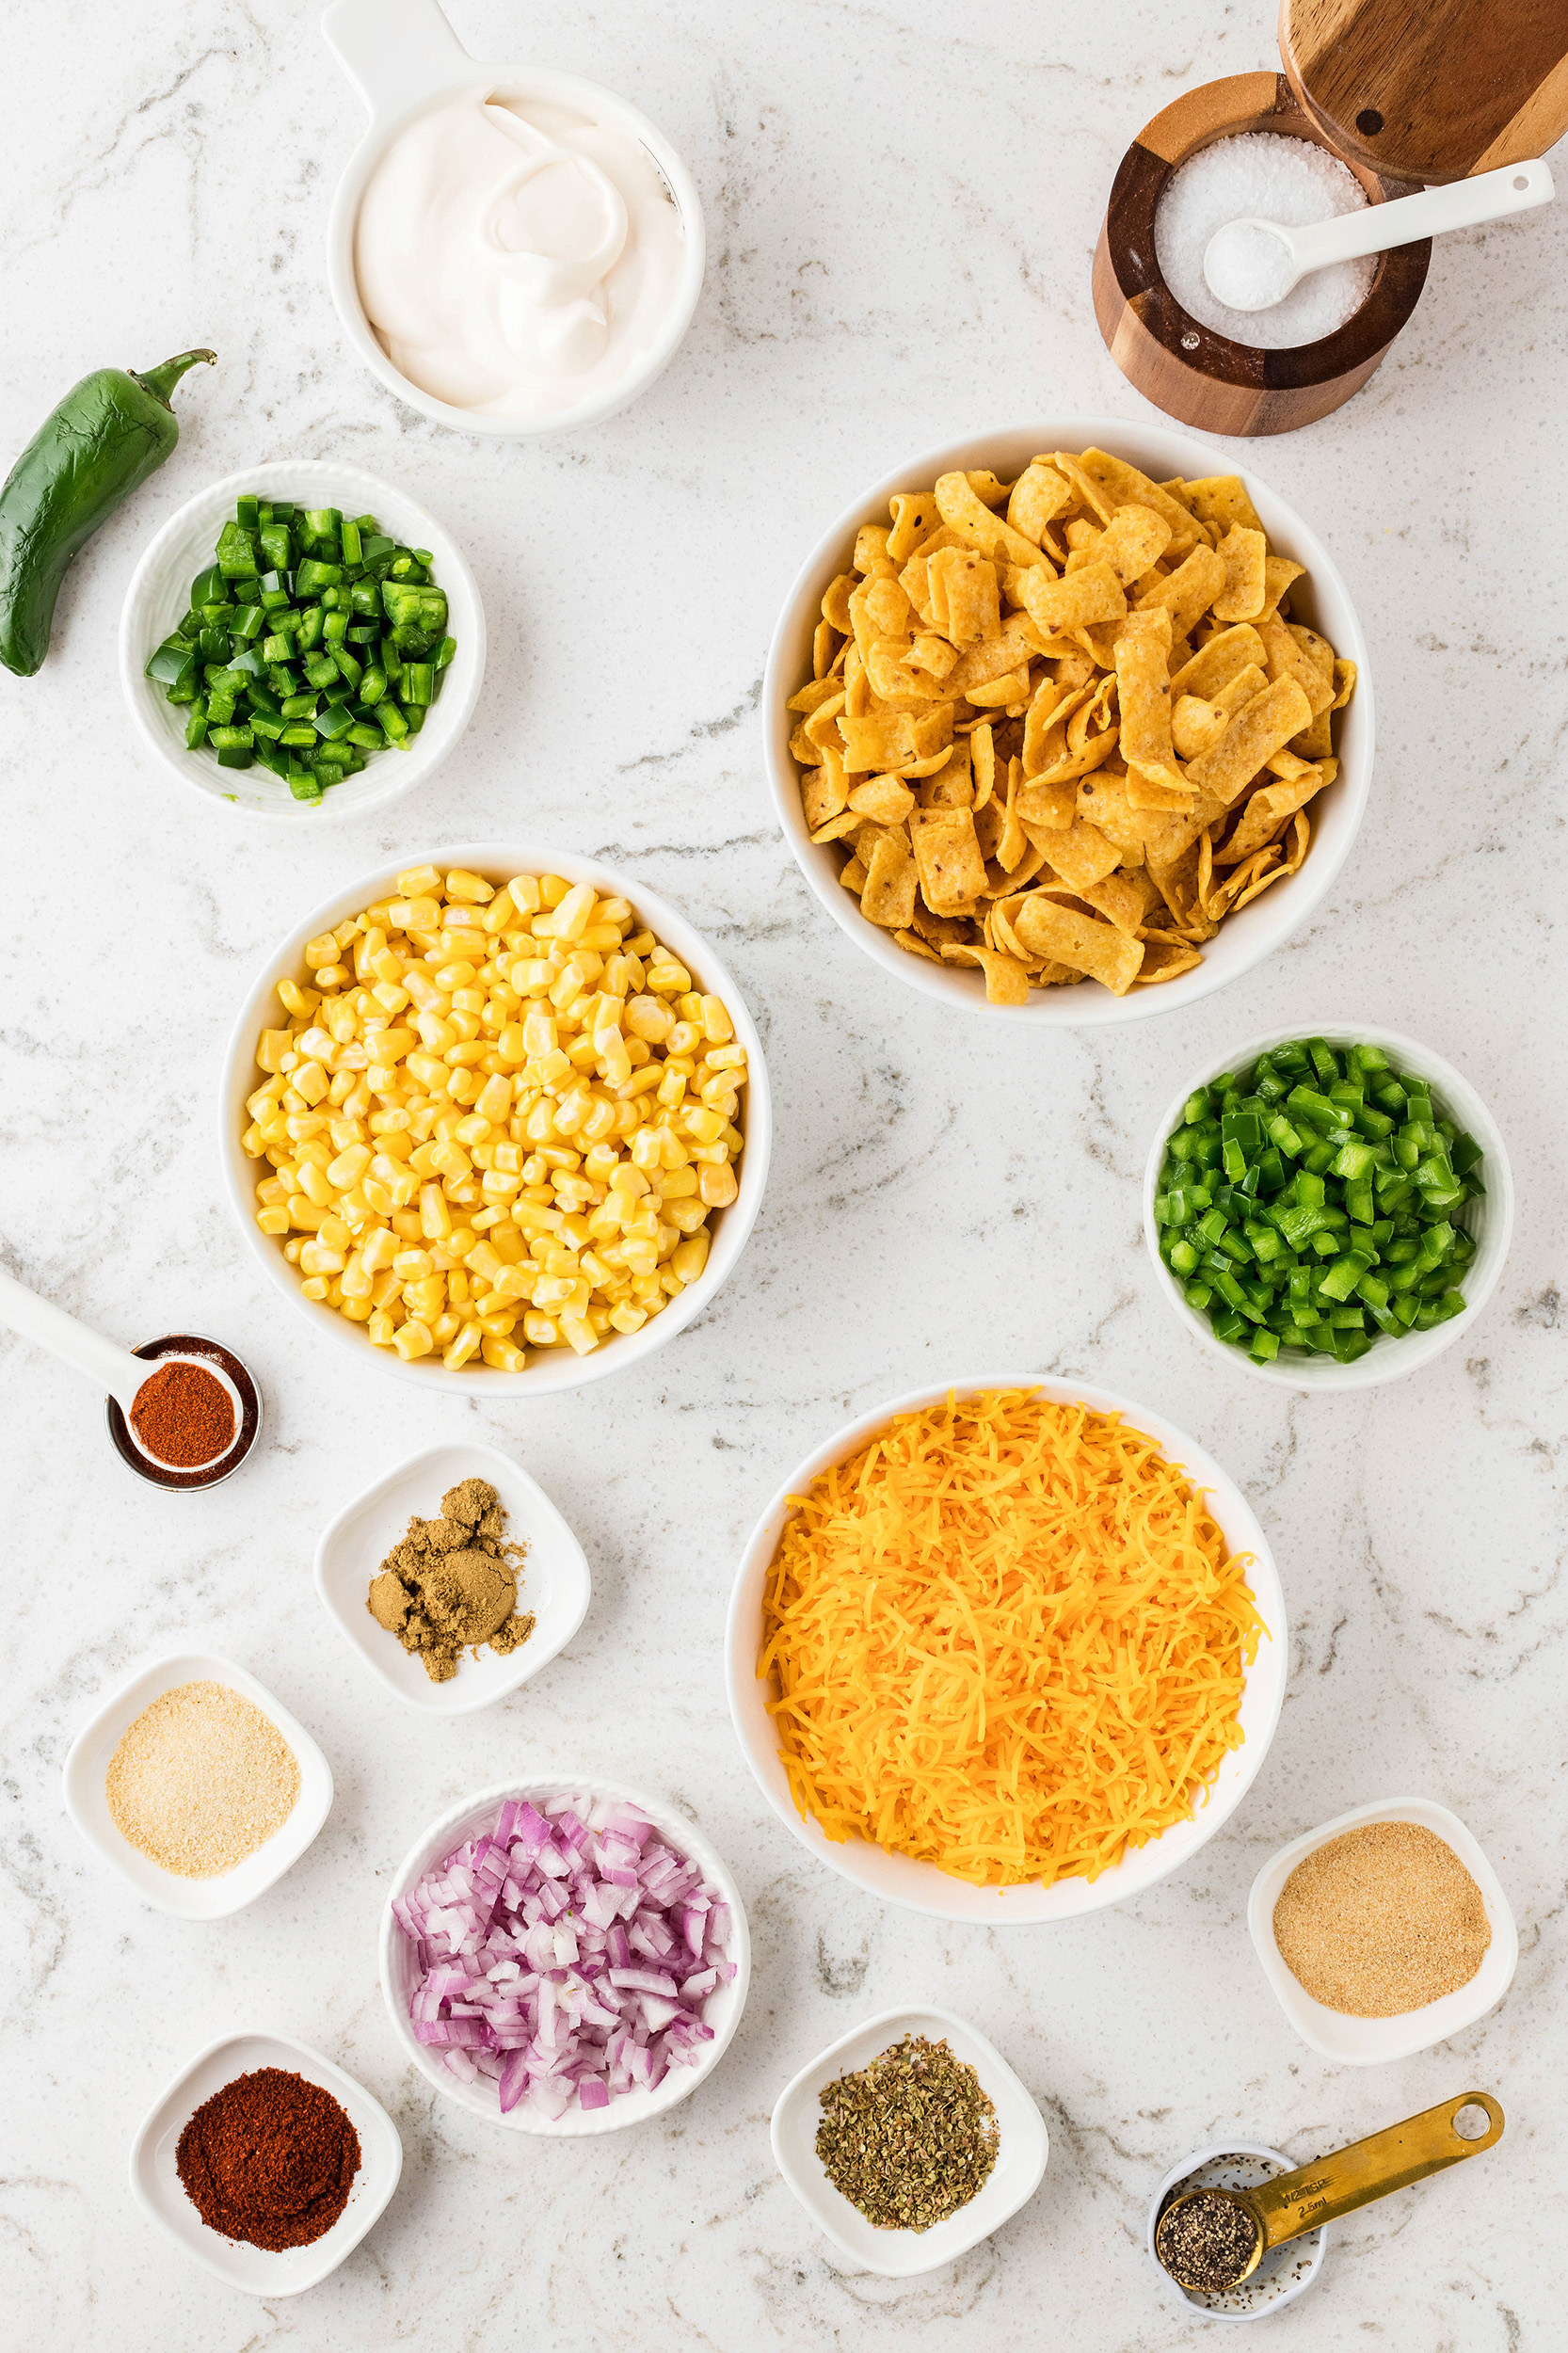 frito corn salad ingredients in small bowls on a marble countertop